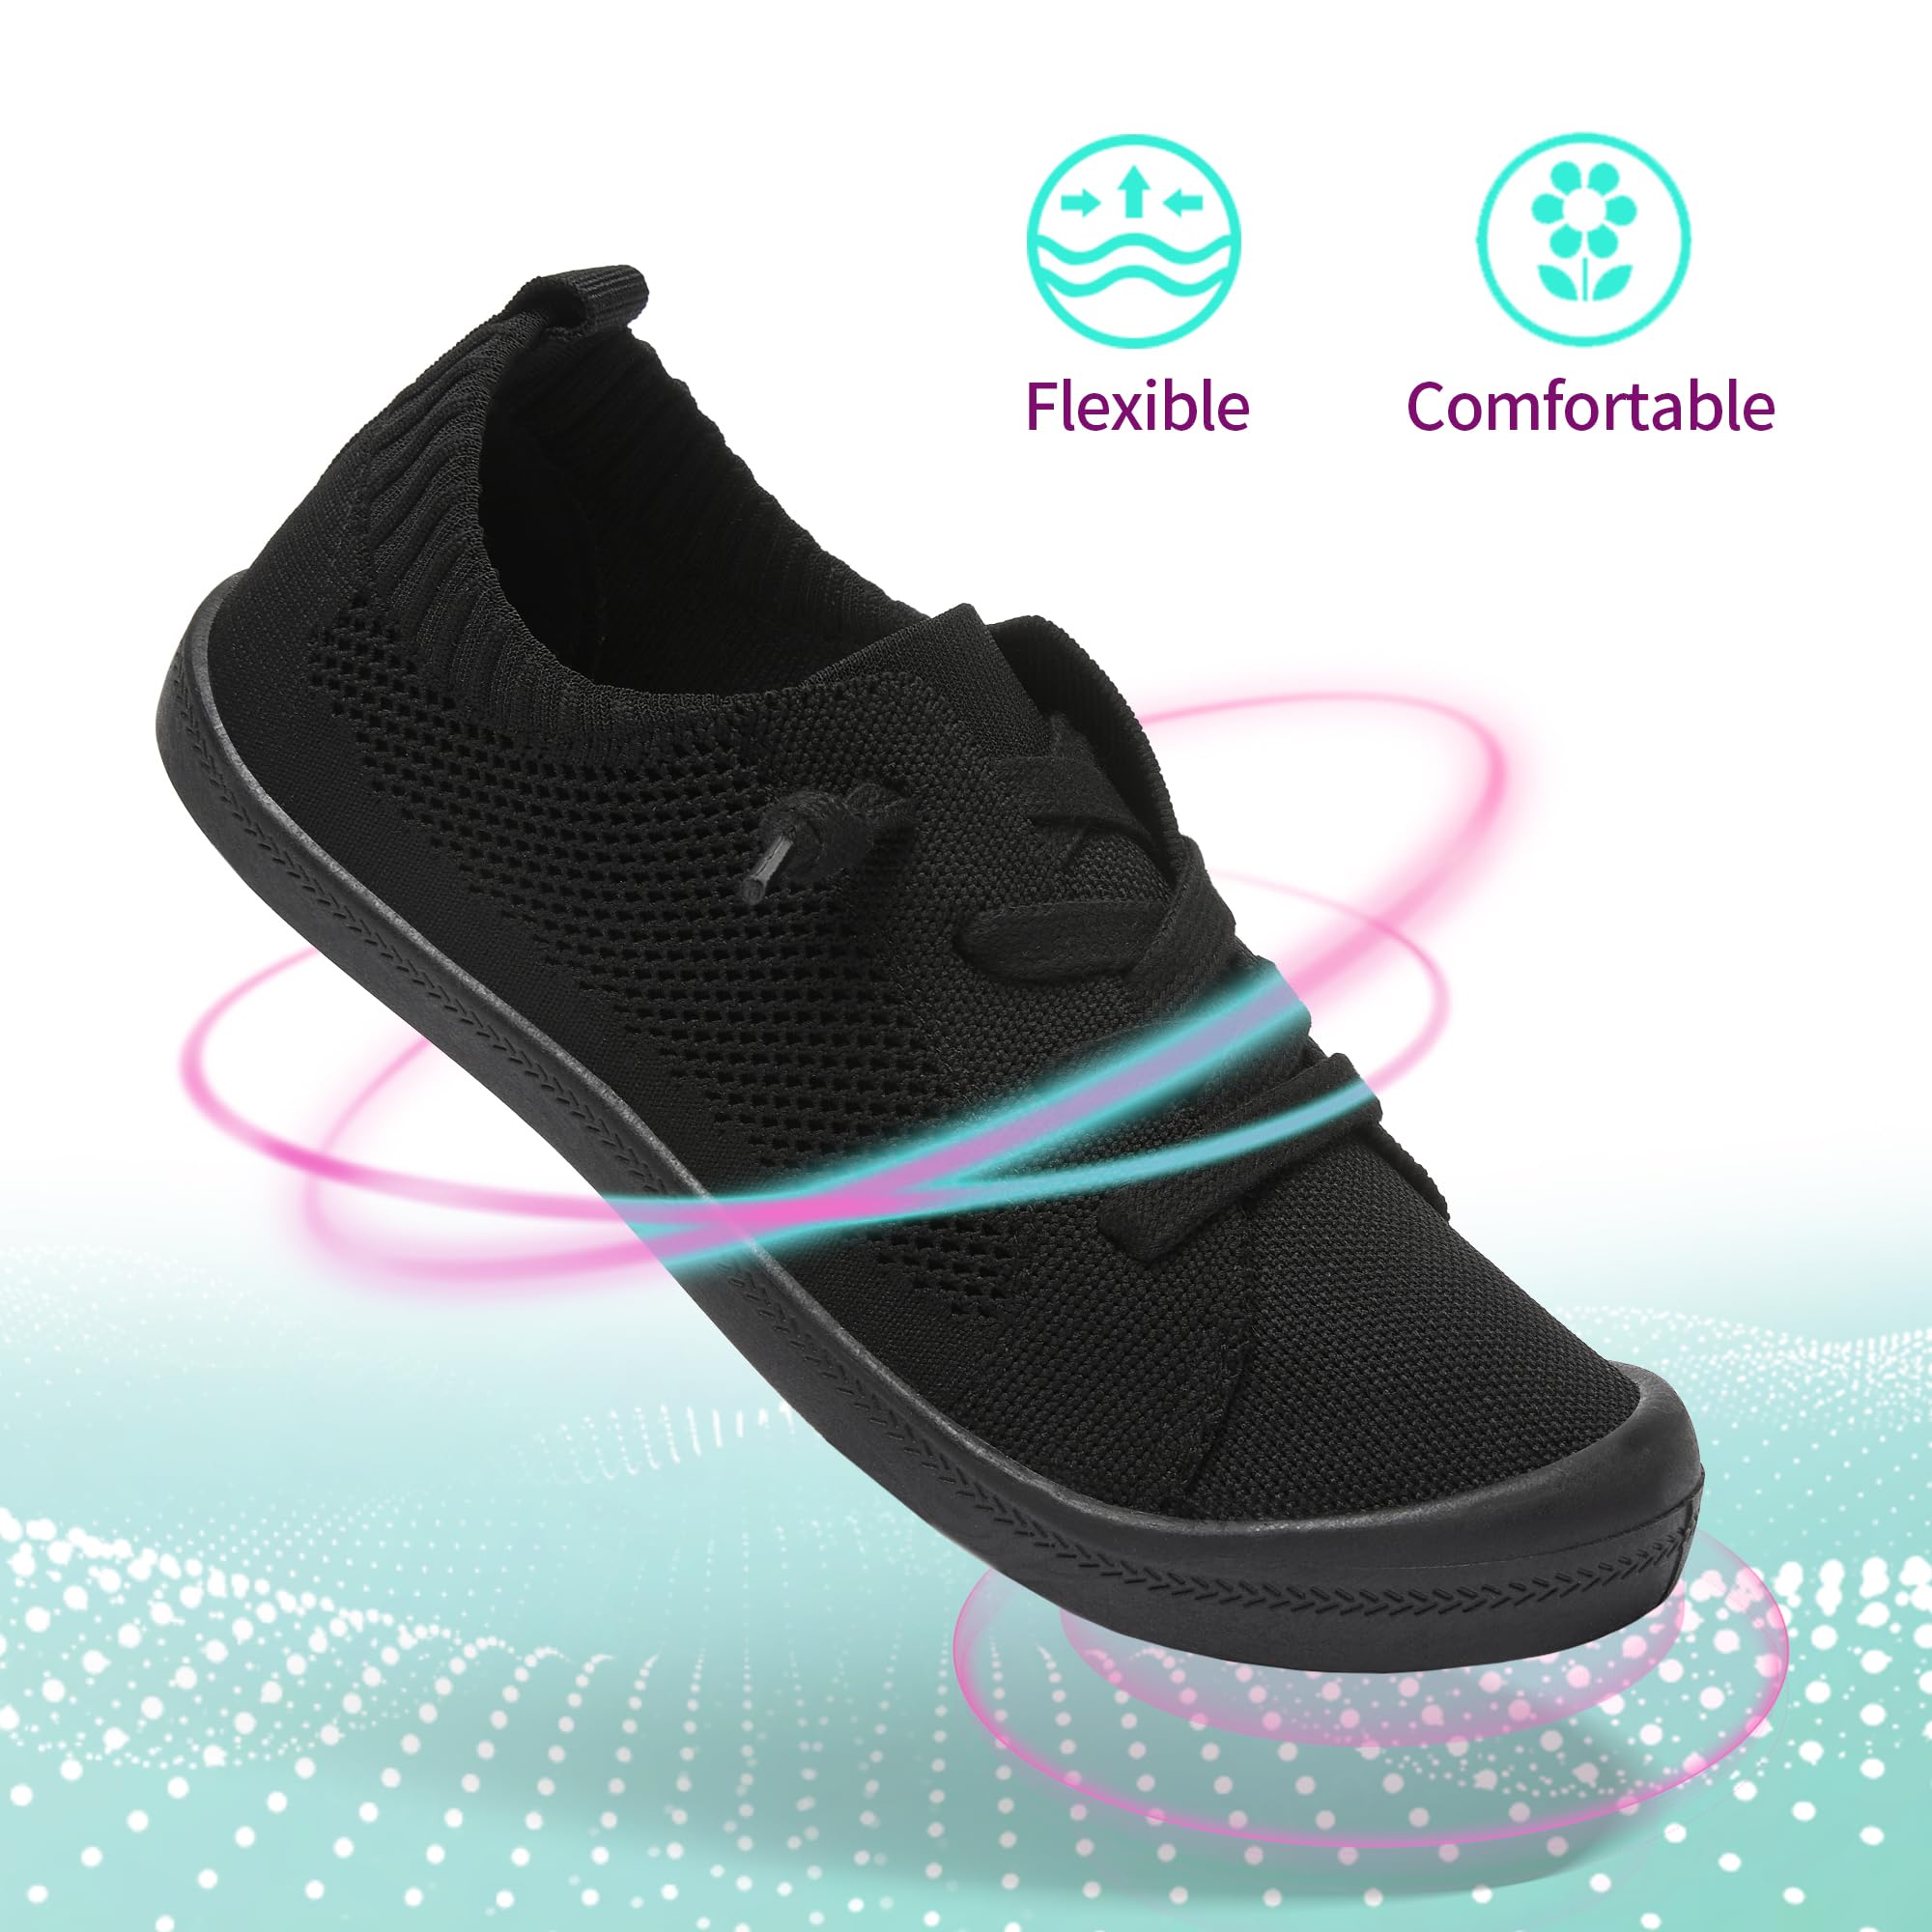 ALTOCIS Women's Knit Slip On Sneakers Ladies Elastic Low Top Flats Lightweight Breathe Mesh Fashion Sneakers Cute Flying Woven Loafers(All Black US8)